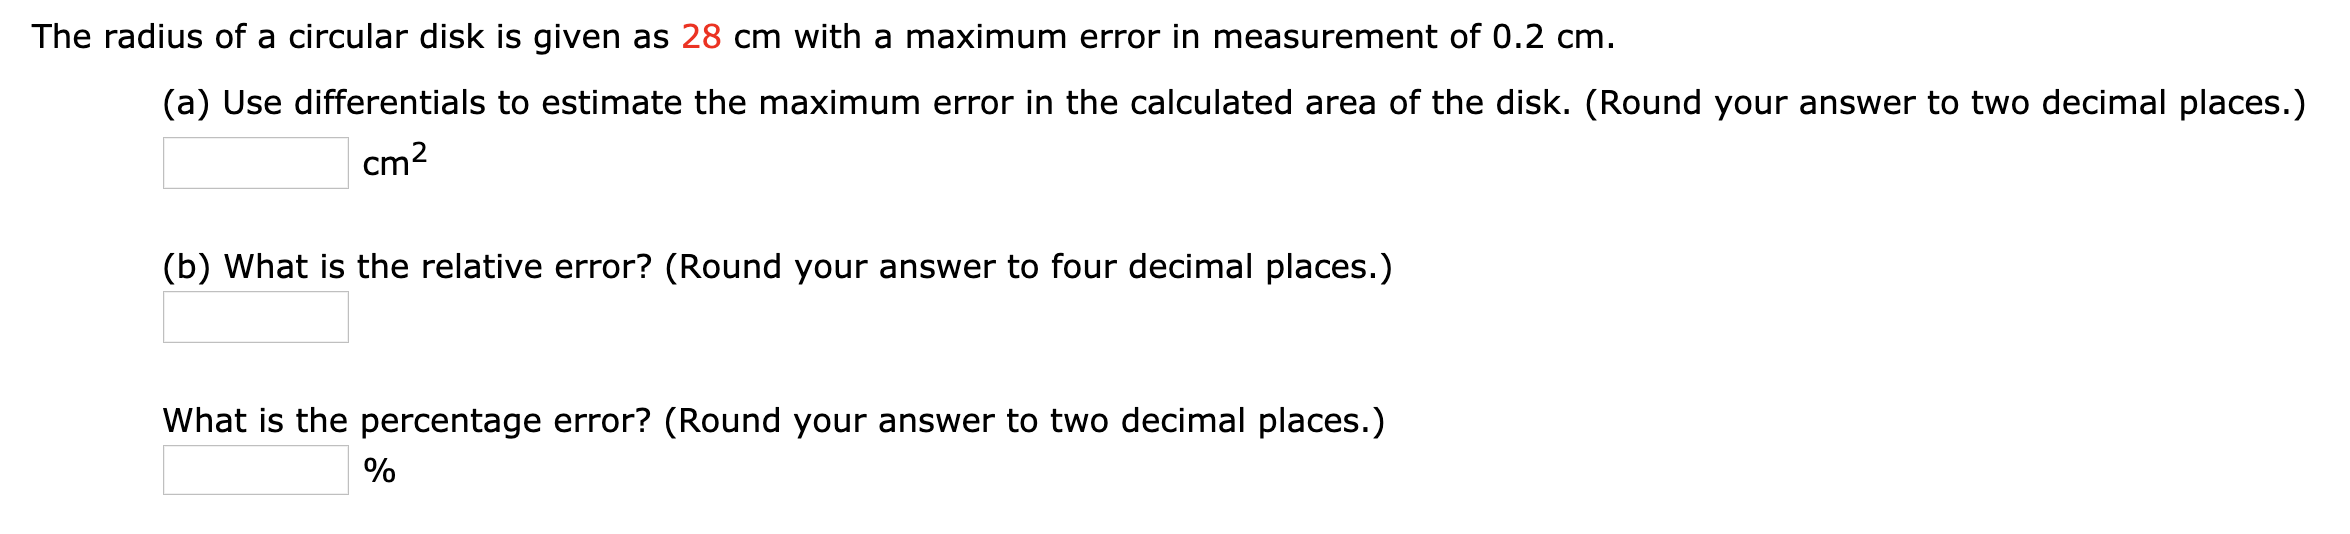 The radius of a circular disk is given as 28 cm with a maximum error in measurement of 0.2 cm.
(a) Use differentials to estimate the maximum error in the calculated area of the disk. (Round your answer to two decimal places.)
cm2
(b) What is the relative error? (Round your answer to four decimal places.)
What is the percentage error? (Round your answer to two decimal places.)
%
